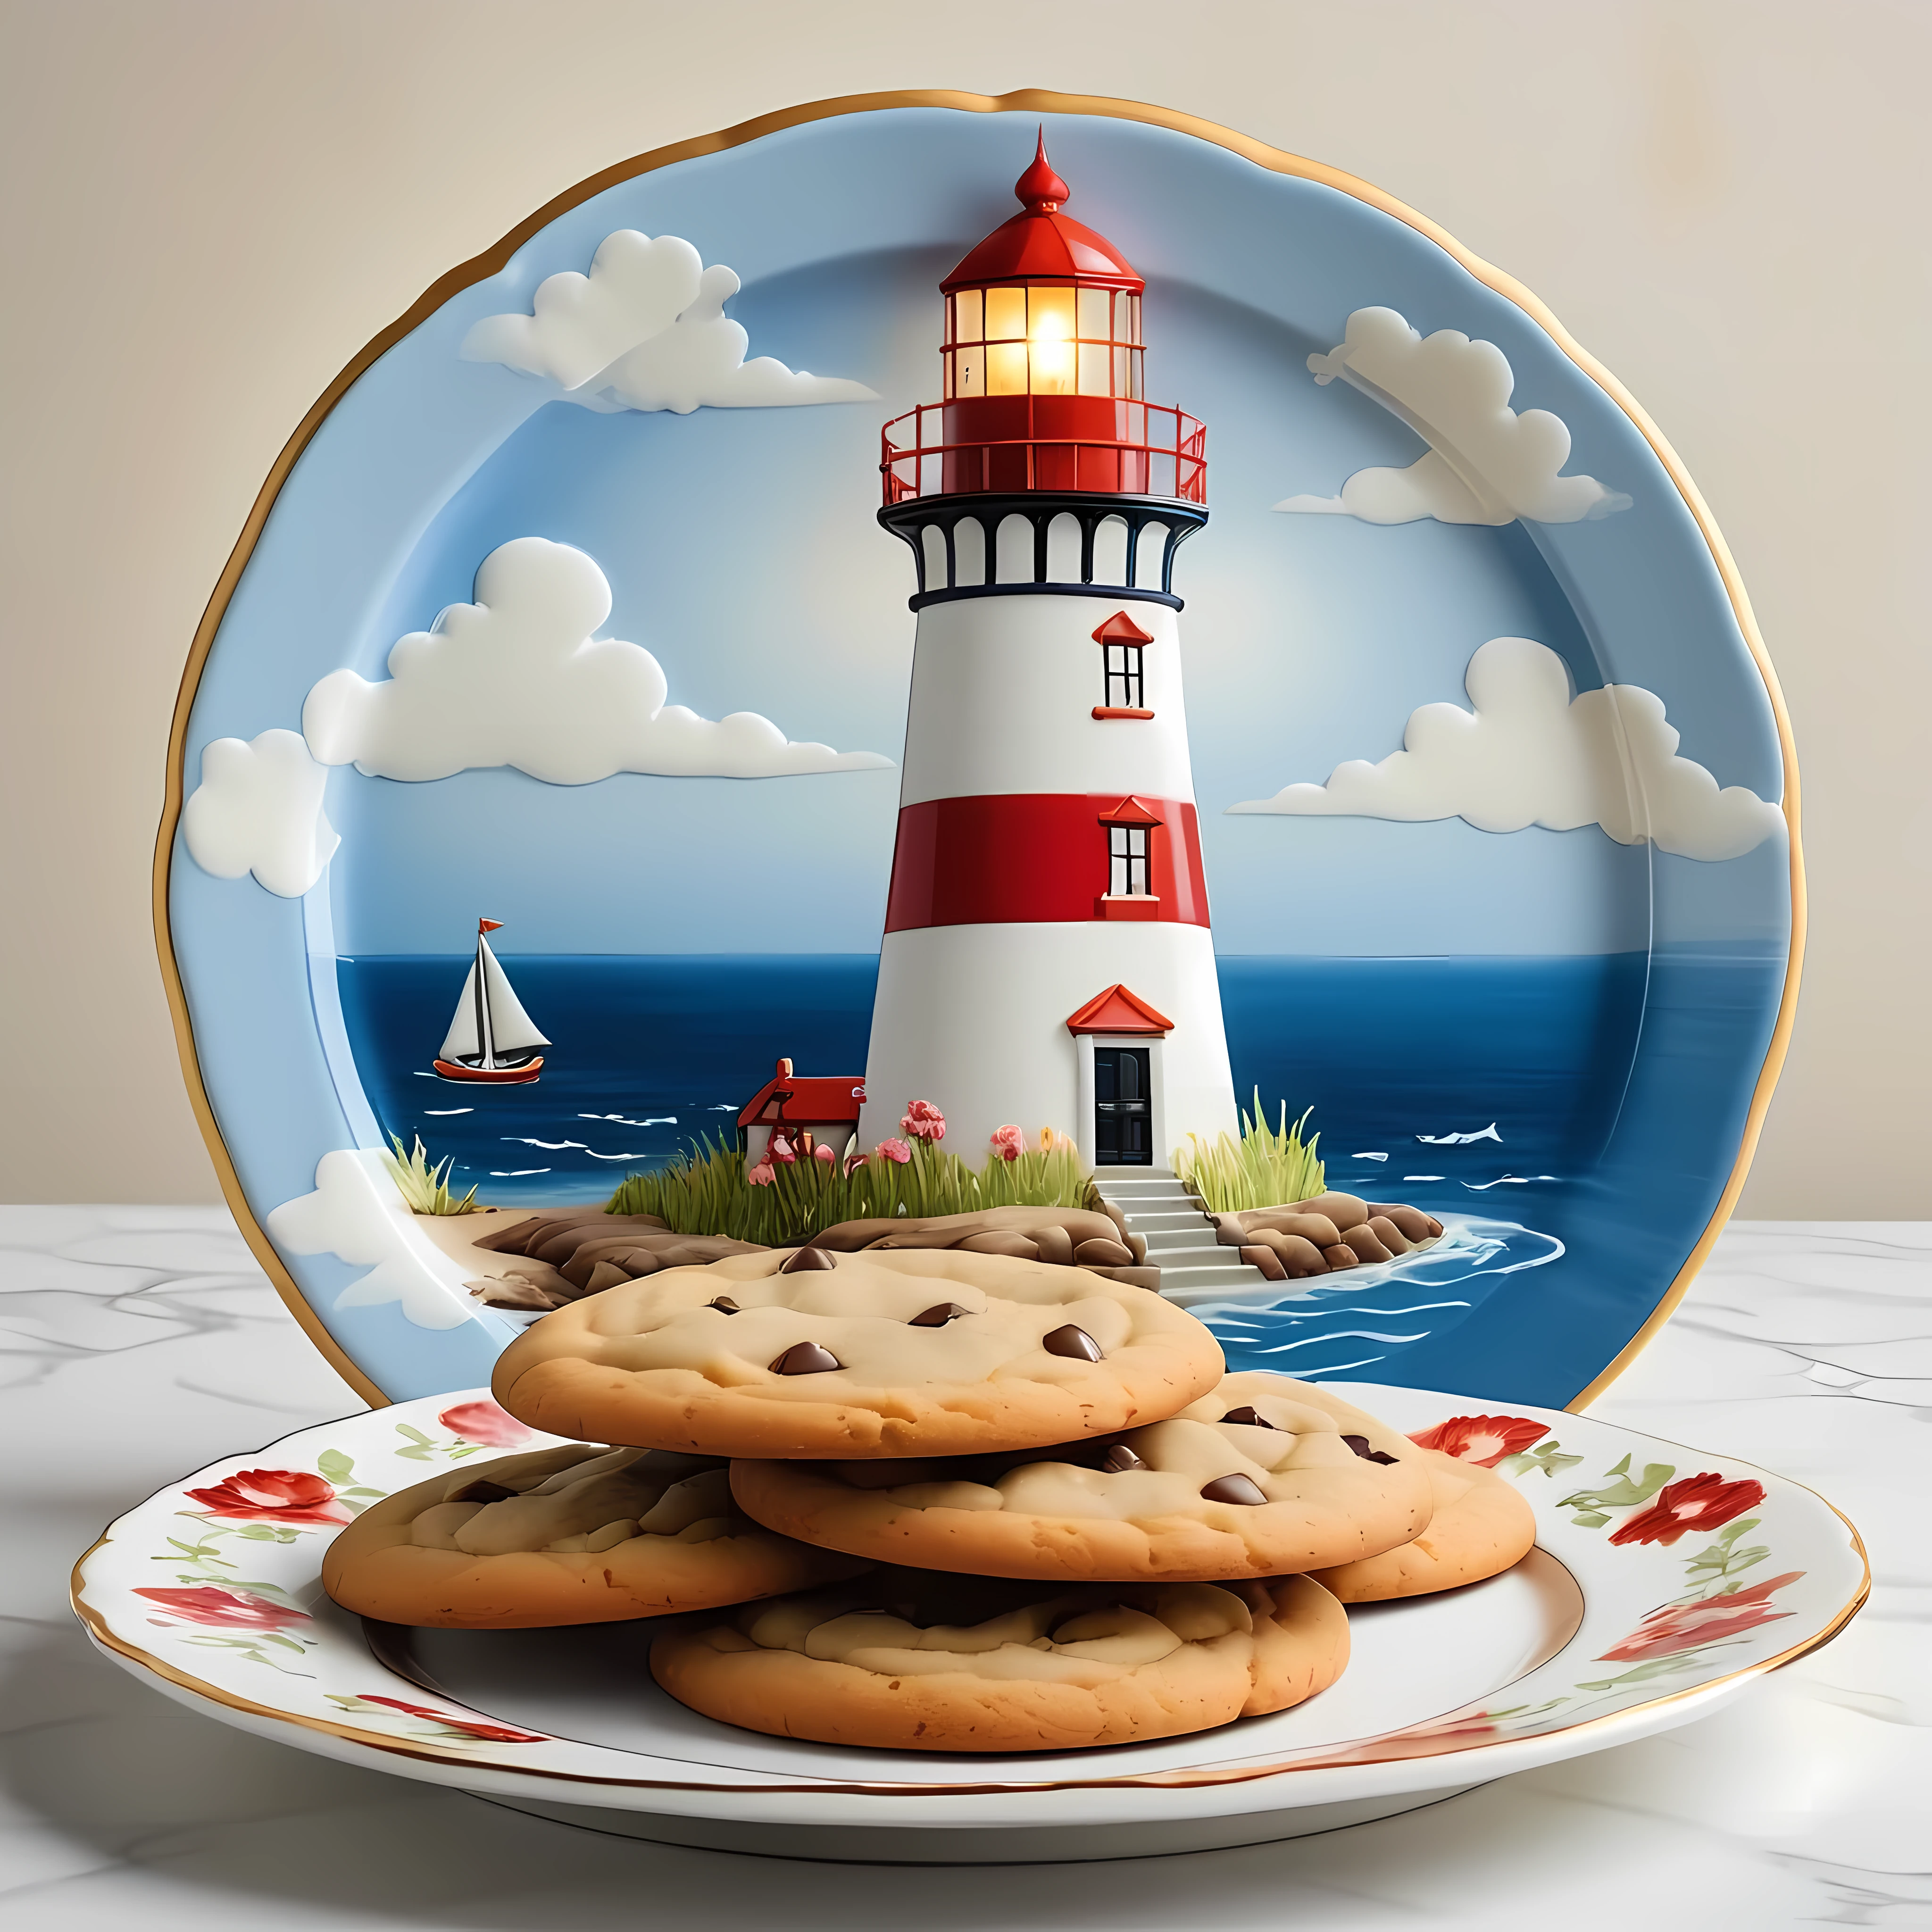 Masterpiece in maximum 16K resolution, superb quality, close up of an elegant plate with an image of an eerie marine scene with an otherworldly lighthouse, vintage look, the plate iade of finest crystals) and positioned on an empty black table with gothic patters, colorful. | ((More_Detail))
